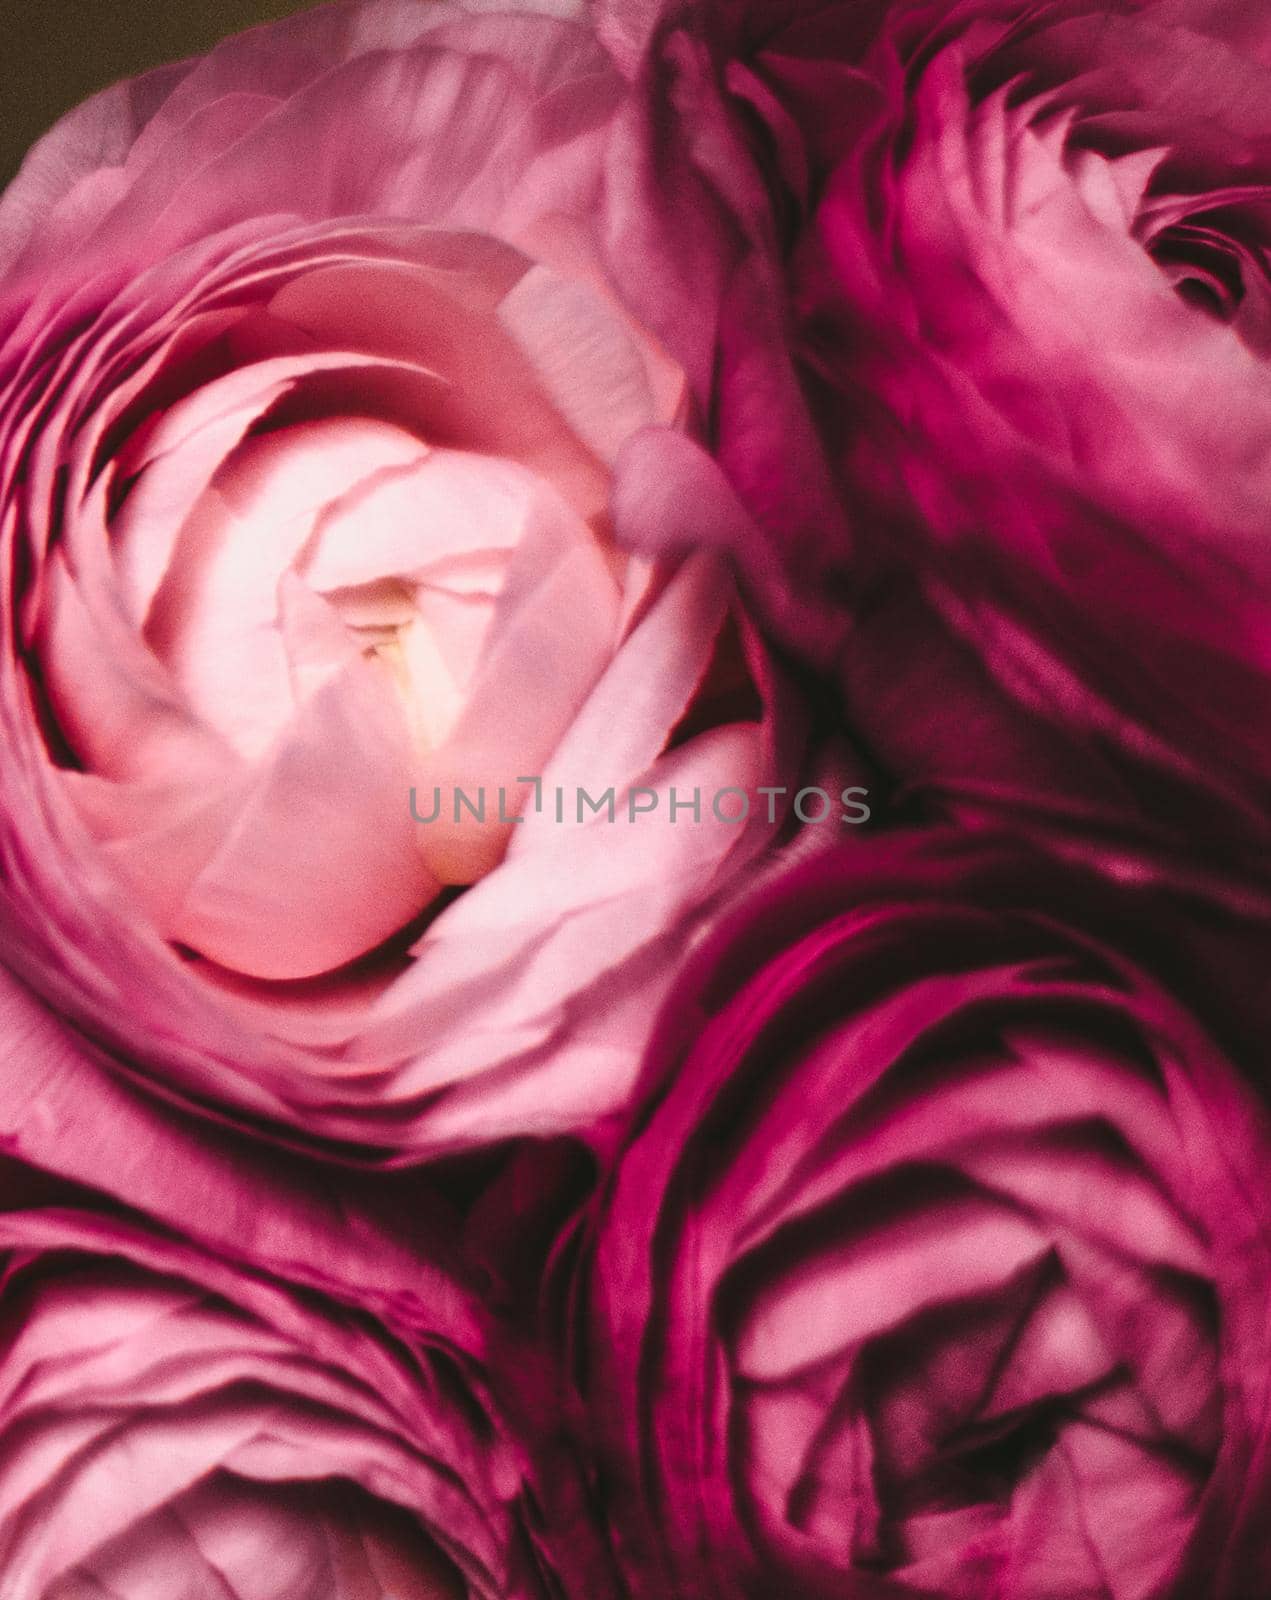 rose flowers close-up - wedding, holiday and floral background styled concept by Anneleven